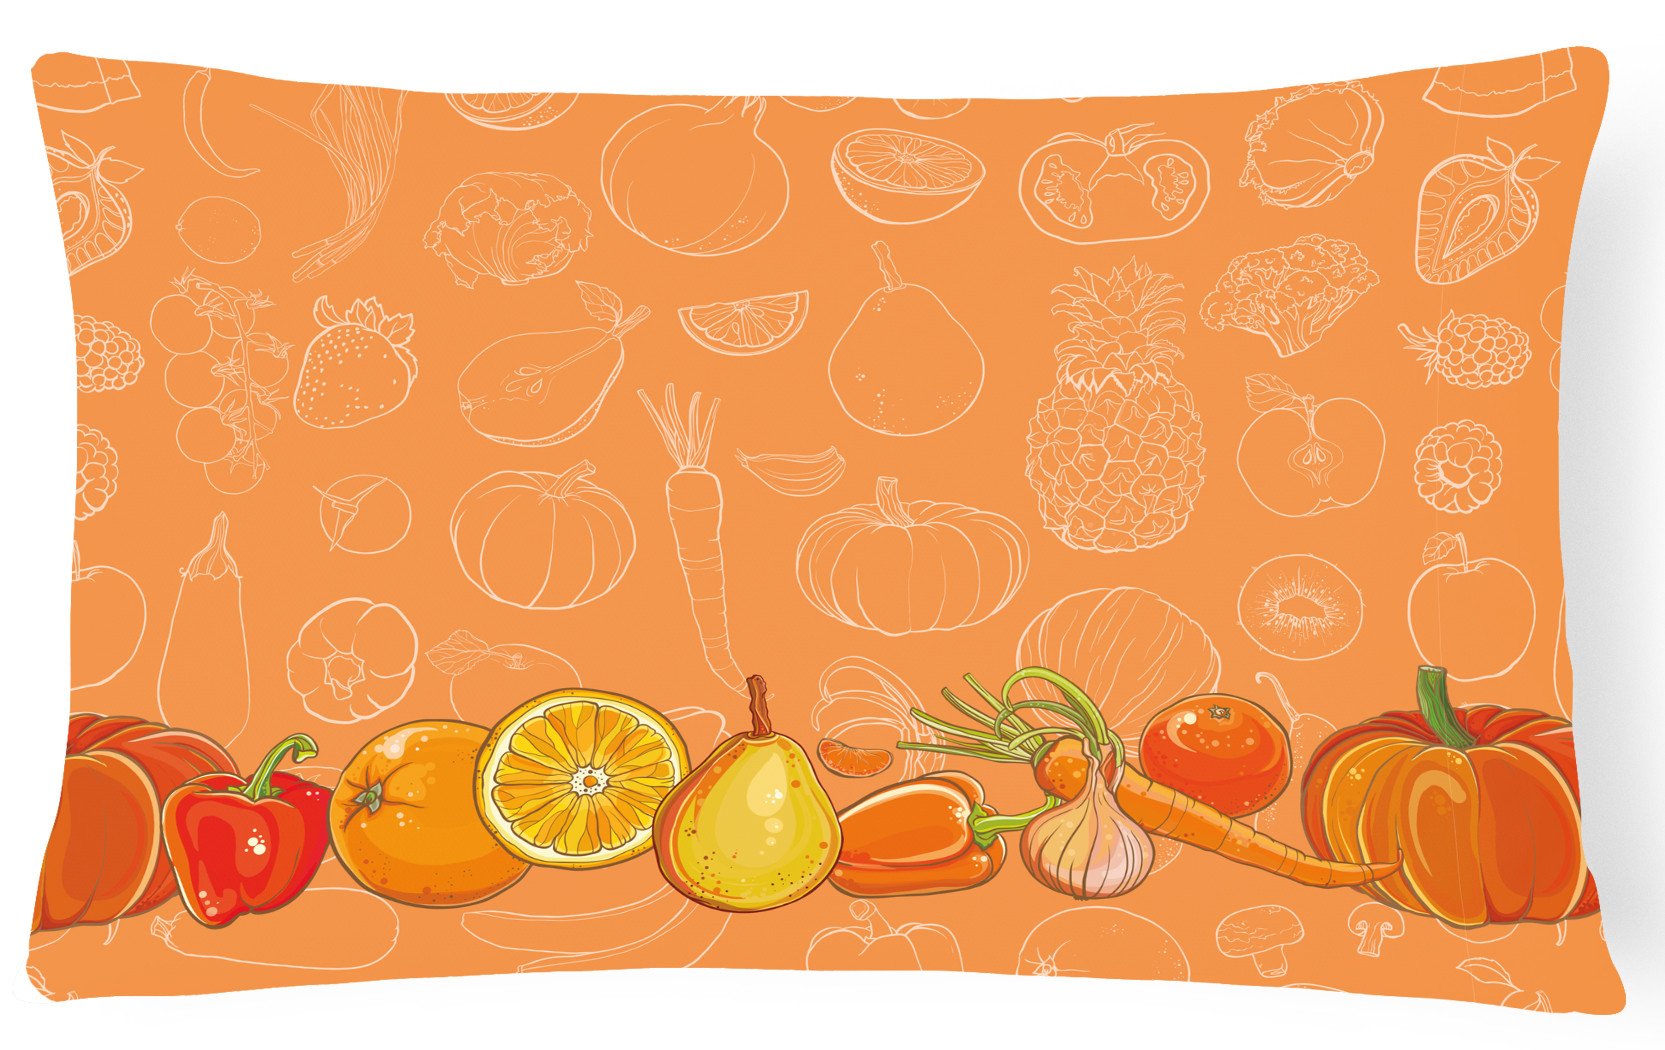 Fruits and Vegetables in Orange Canvas Fabric Decorative Pillow BB5131PW1216 by Caroline's Treasures